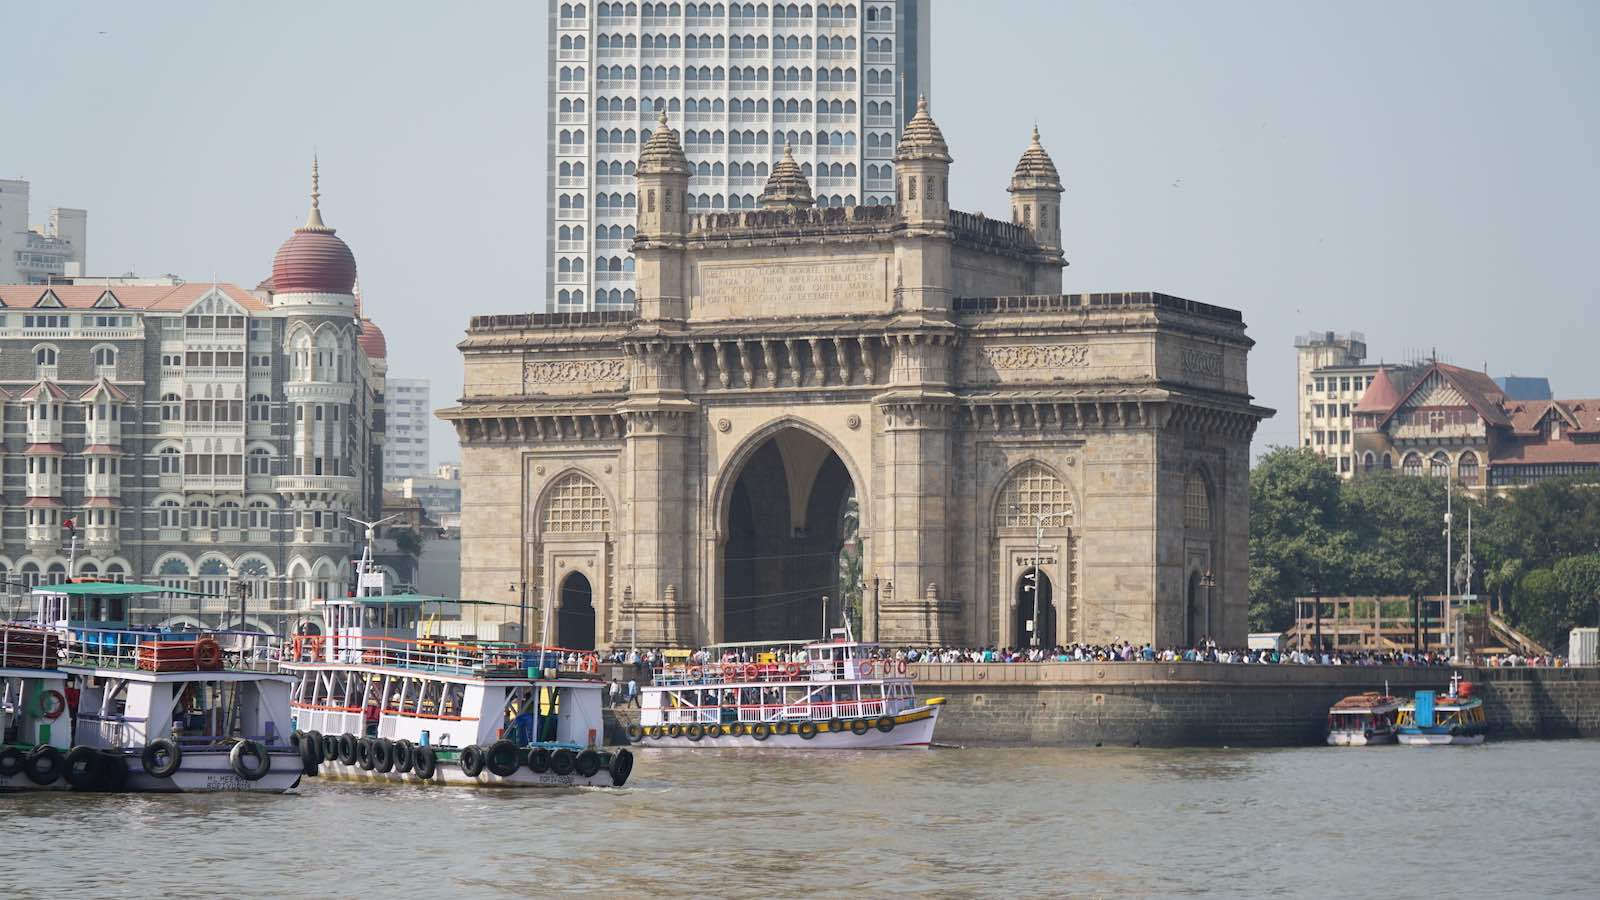 Made my way to the Gateway of India monument, from here I took a boat ferry to a little island off of Mumbai called Elephanta Island.